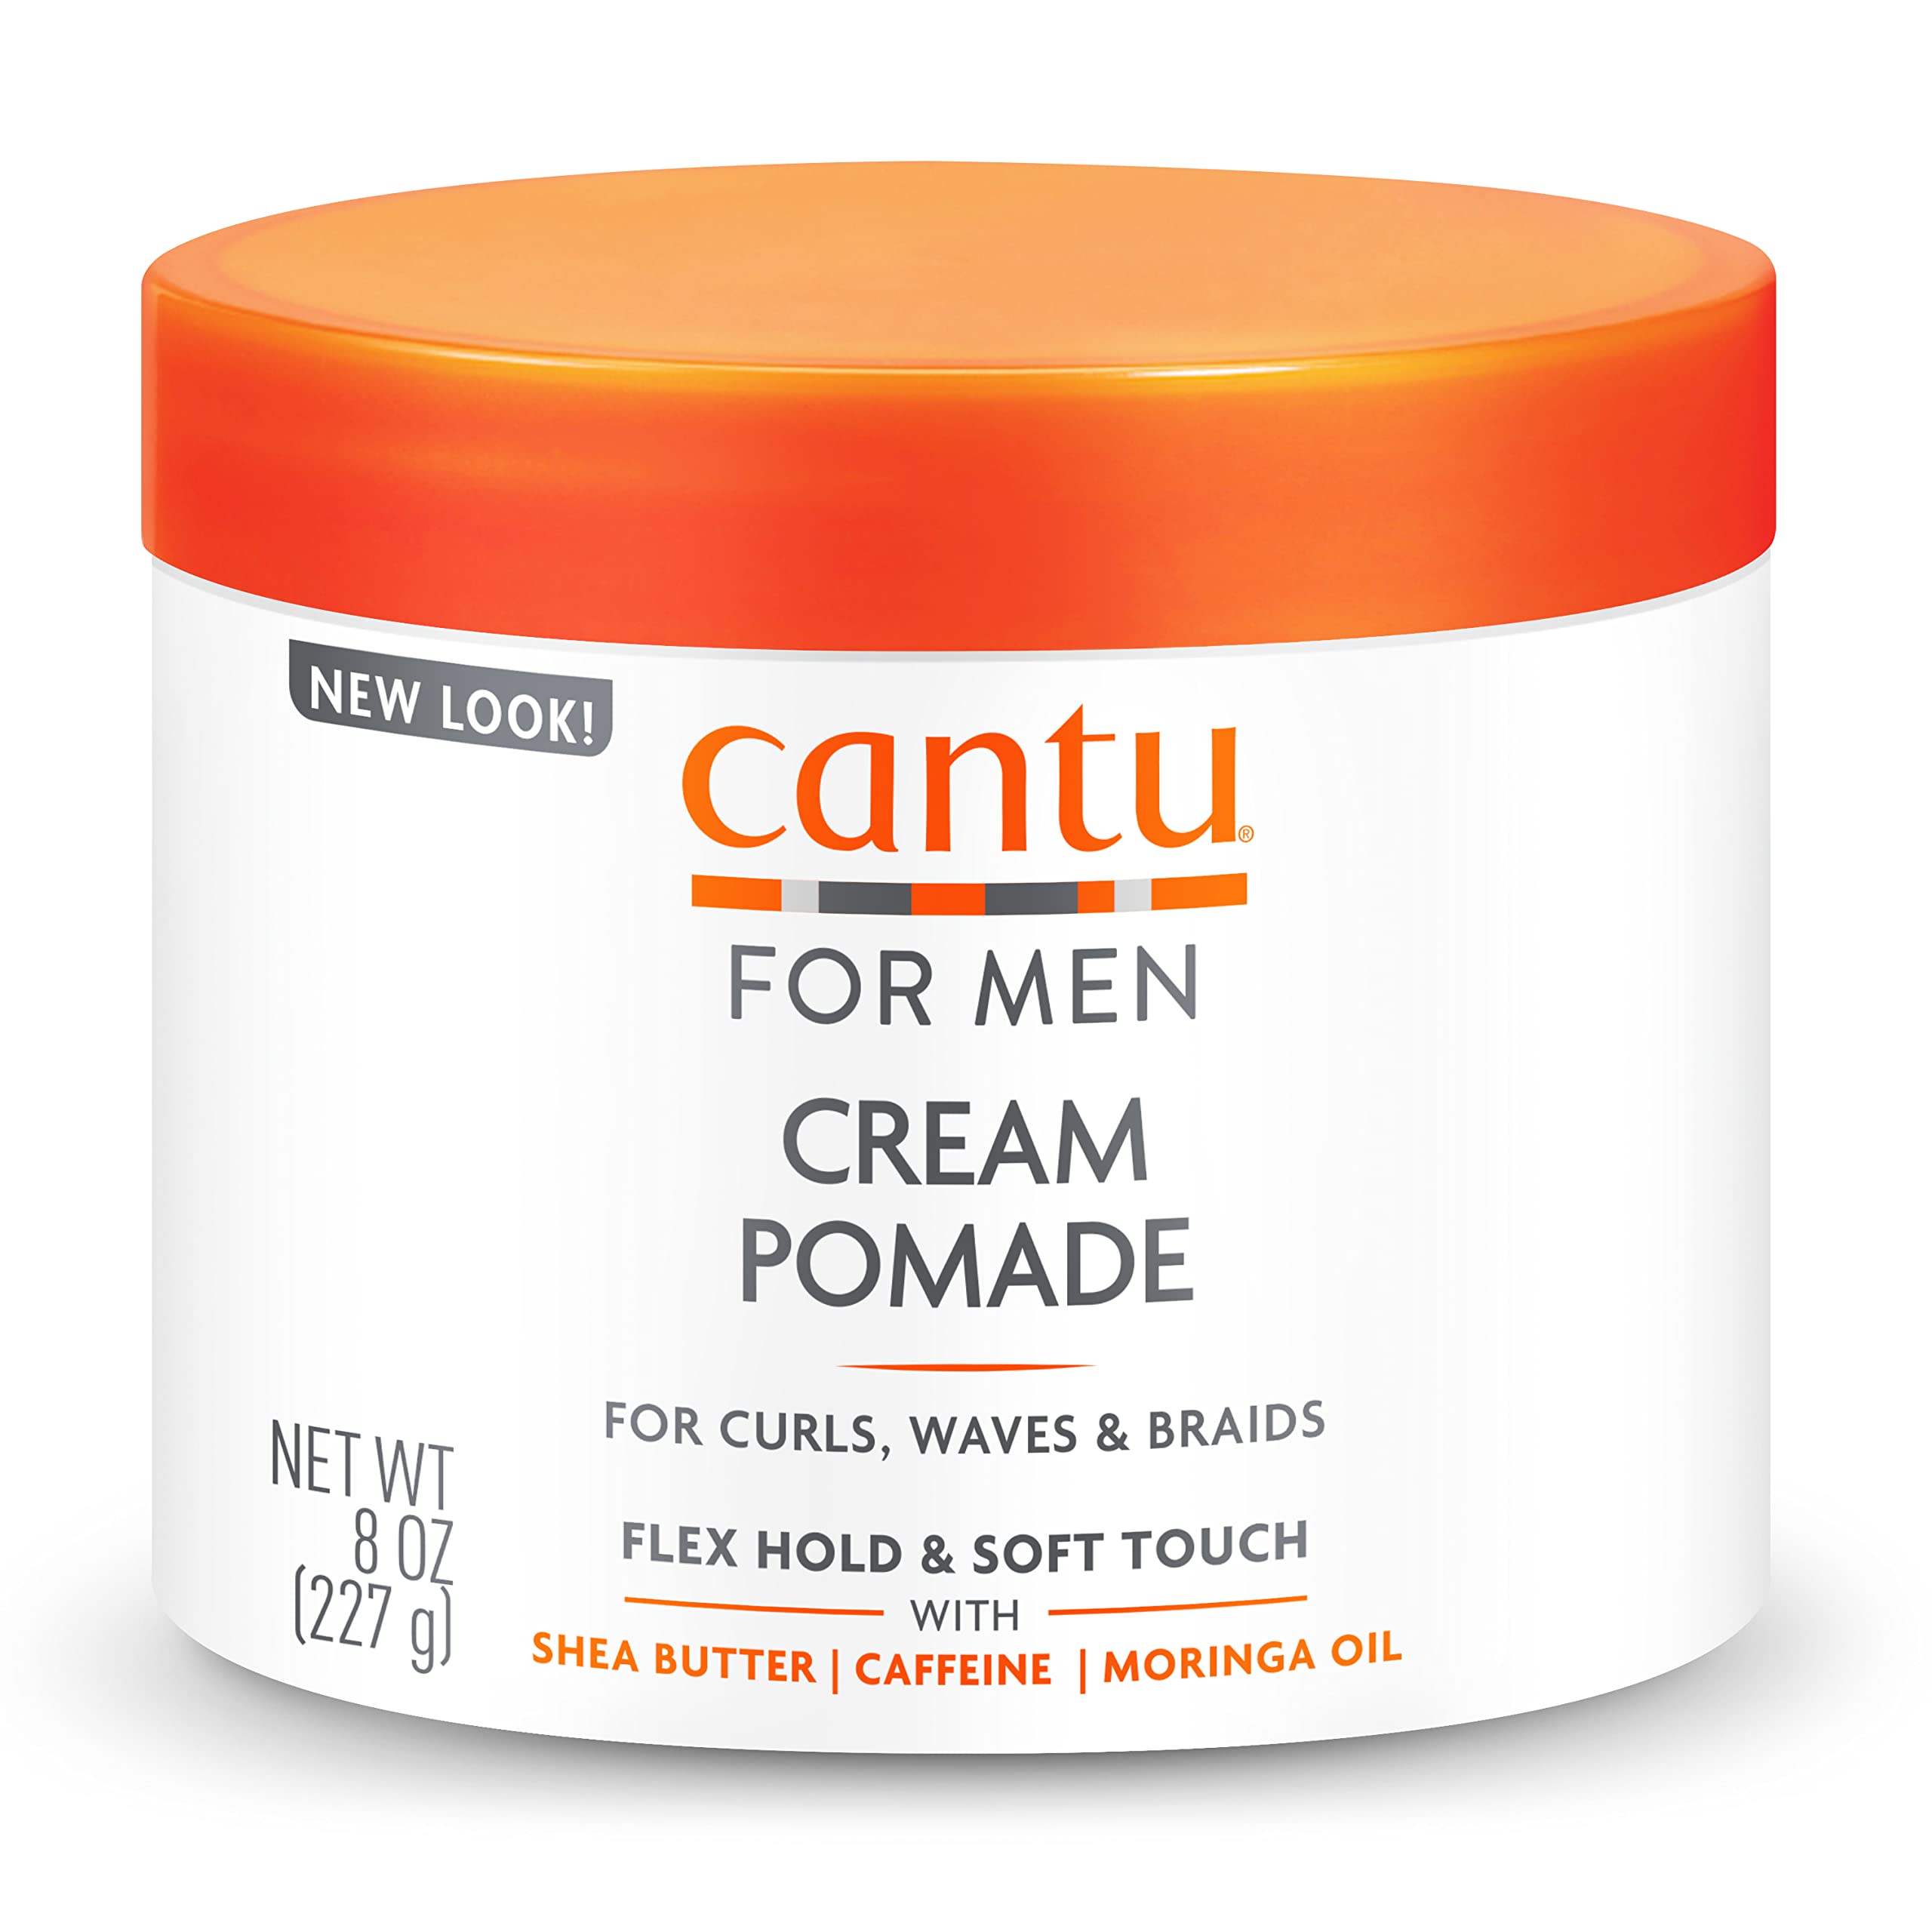 Cantu for Men Cream Pomade Flex Hold, 8 oz (Packaging May Vary)